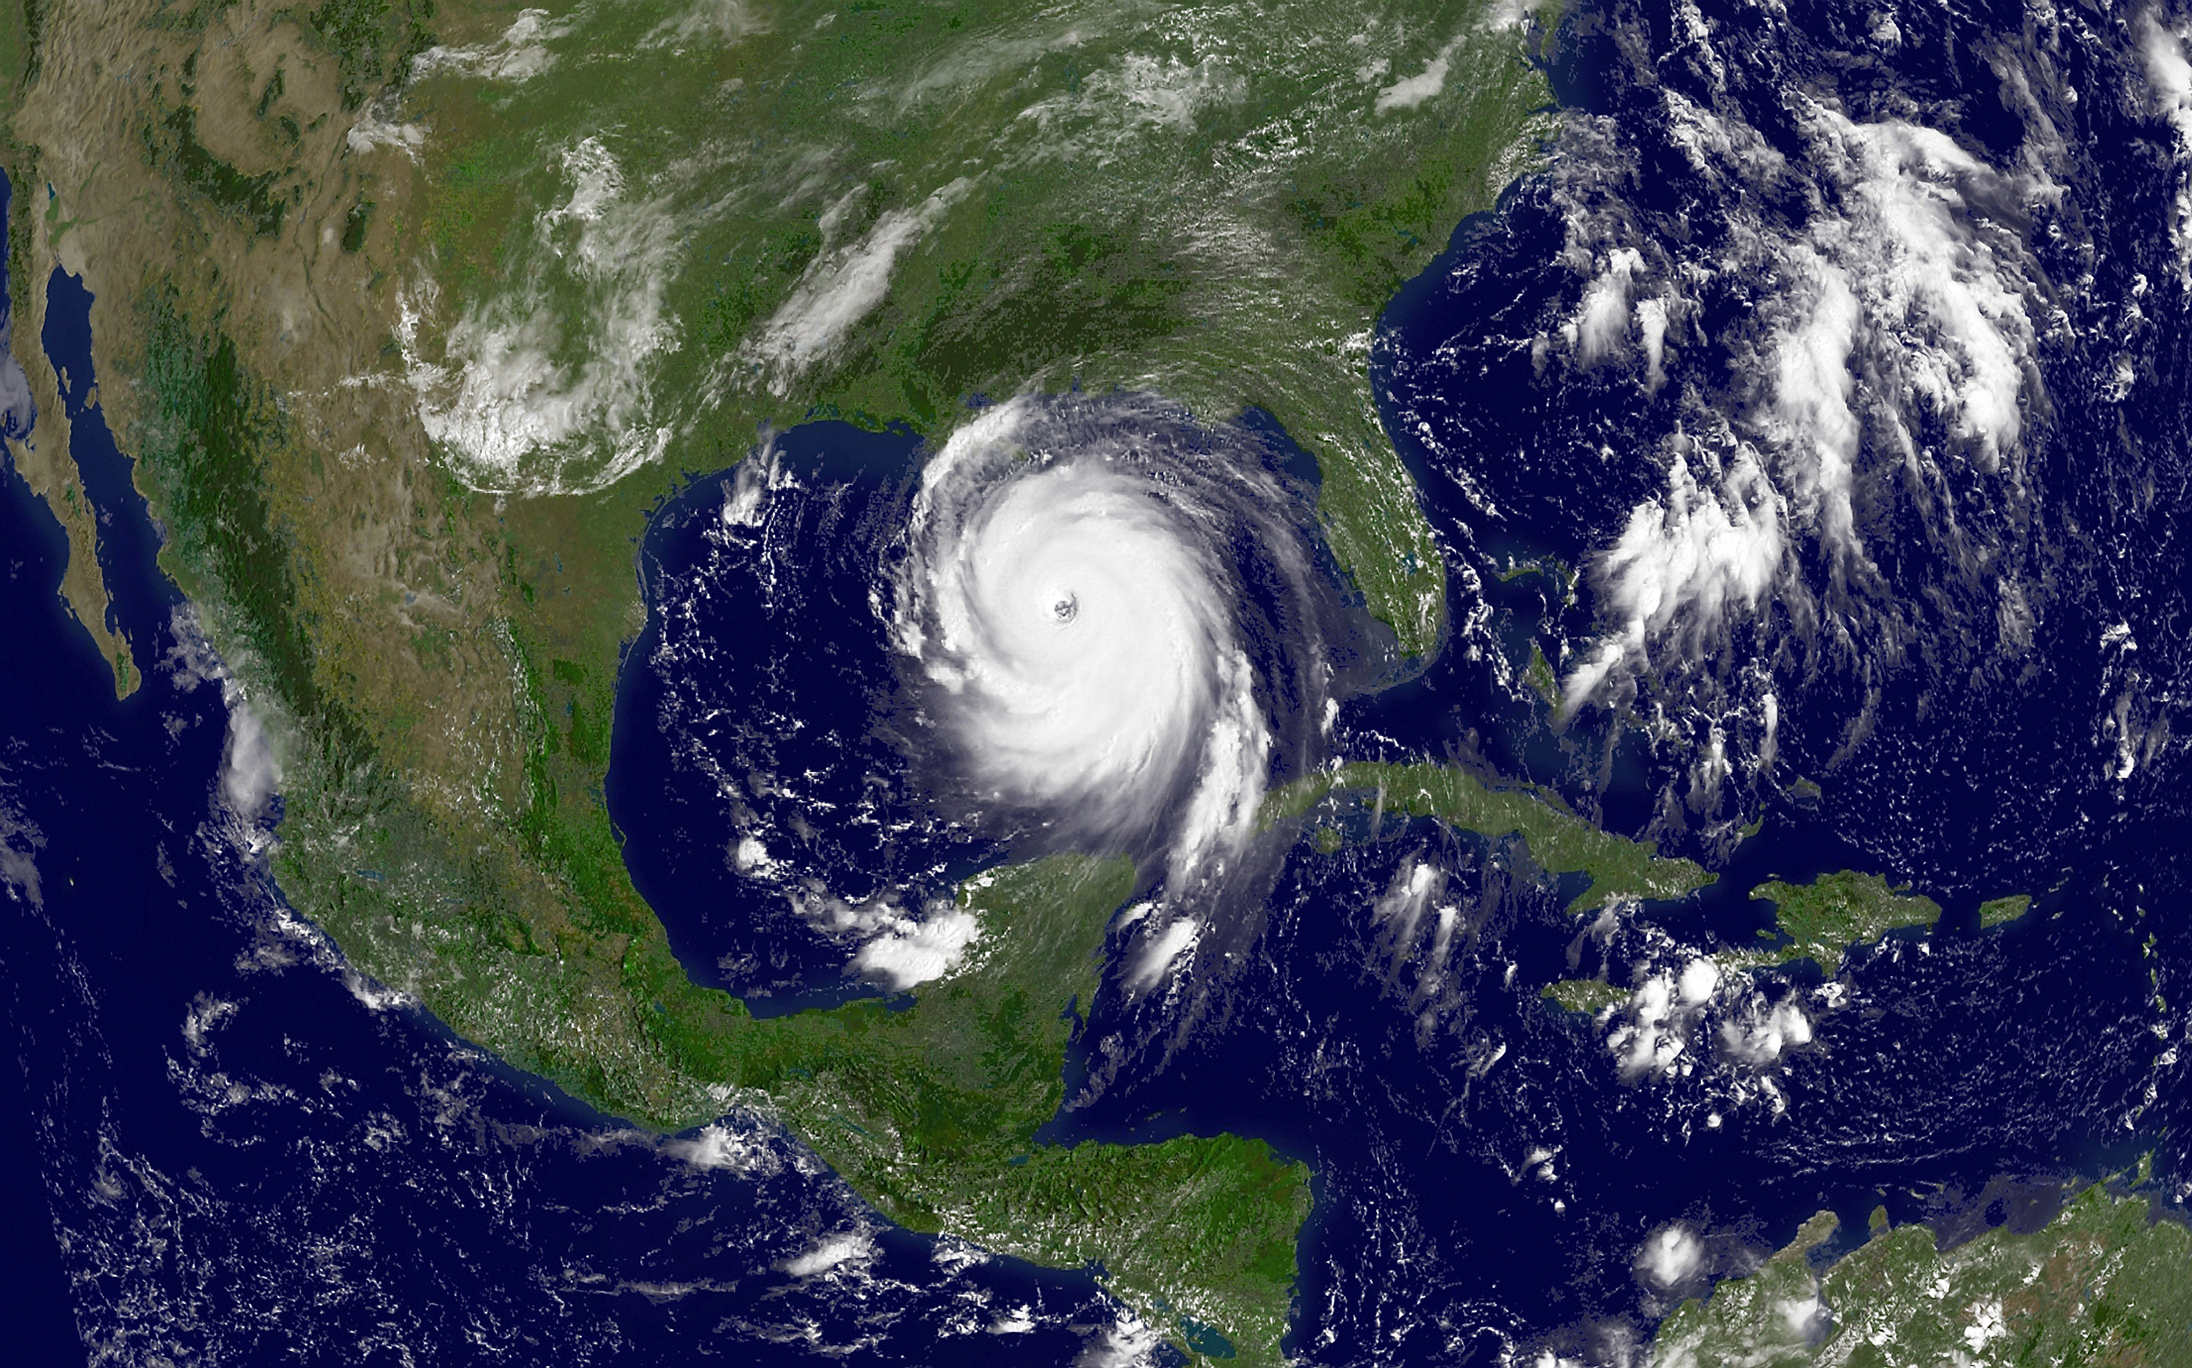 August 28, 2005 - Hurricane Katrina in the Gulf of Mexico.